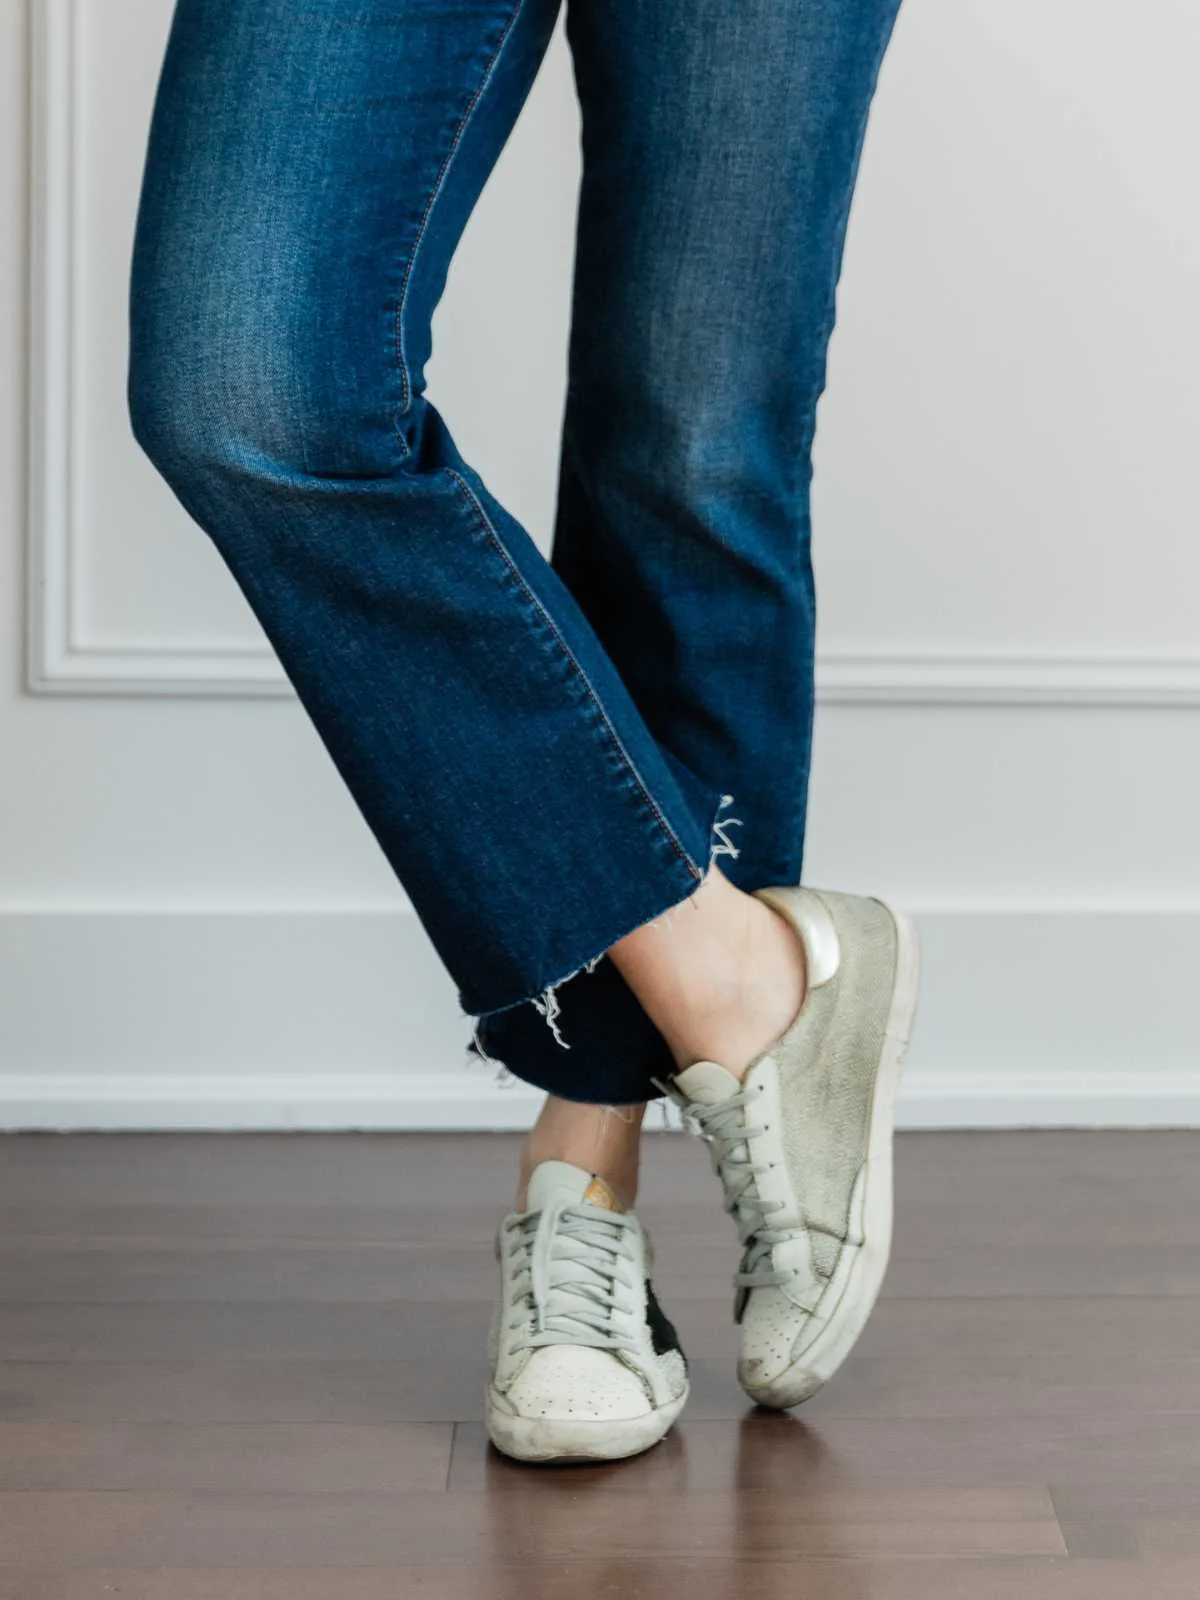 Cropped view of woman's legs wearing   sleek sneakers with kick flares